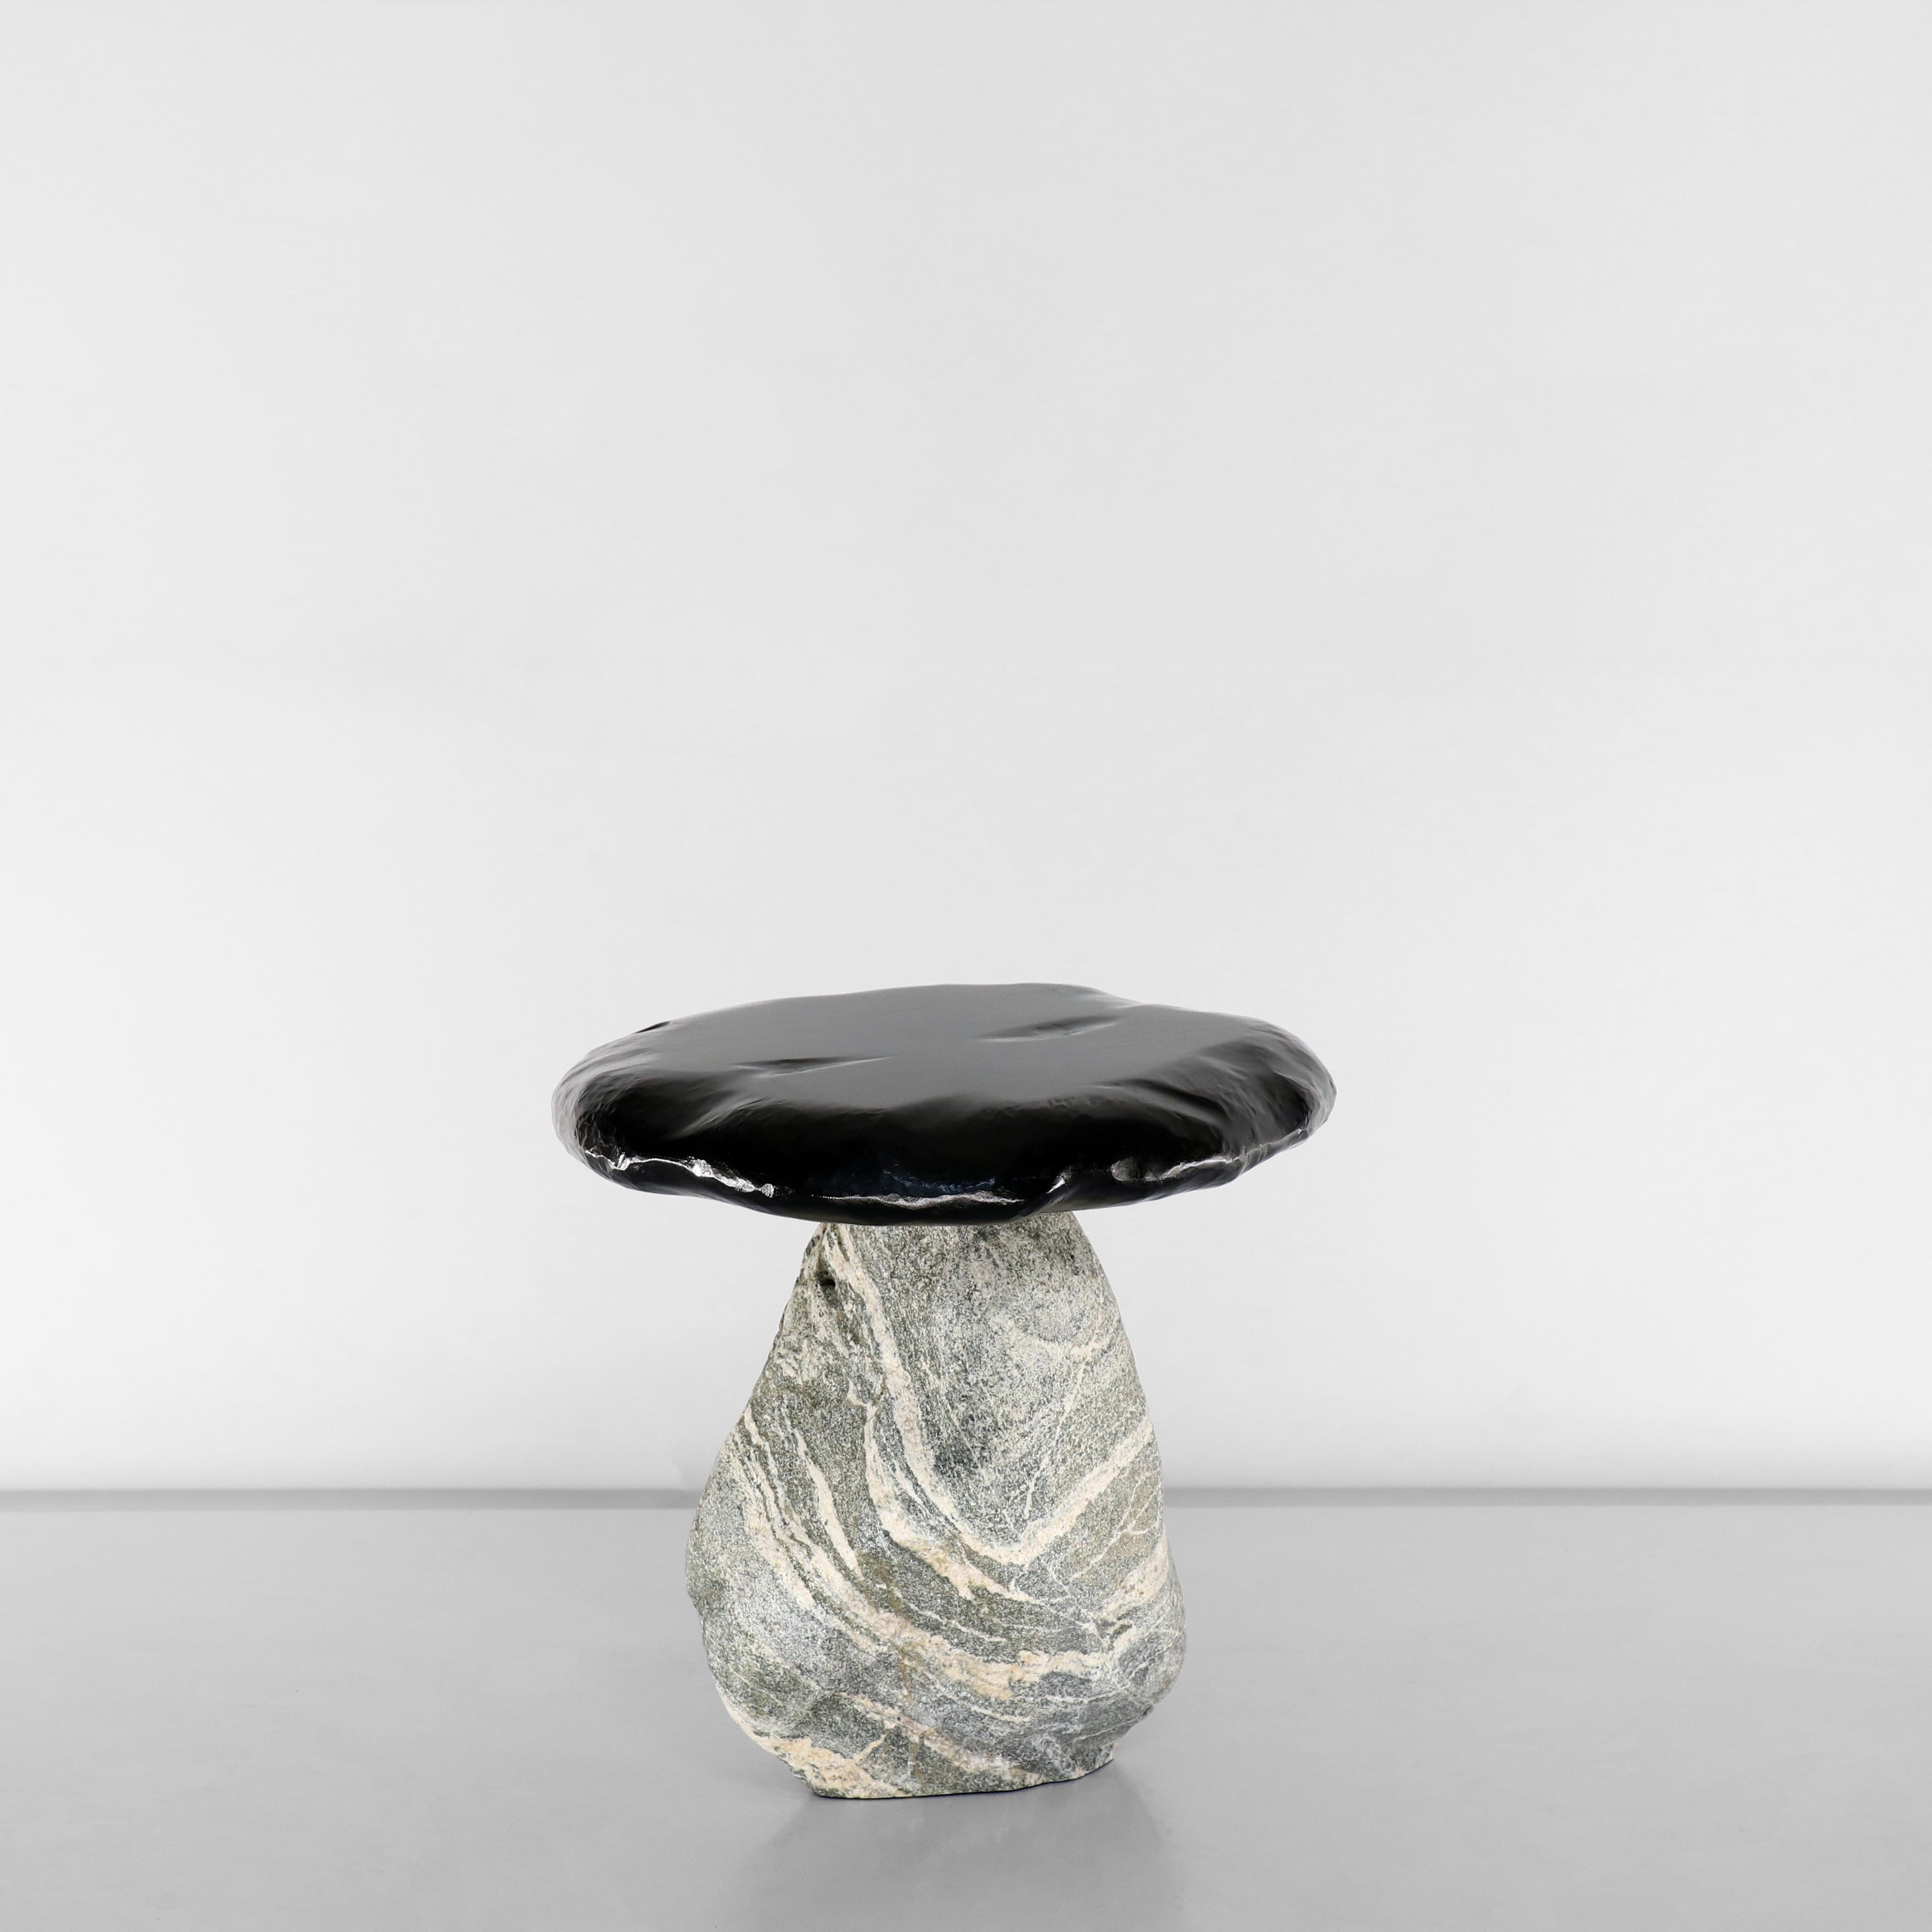 Black Bolete Side Table by Henry D'ath
Dimensions: D 40 x W 45 x H 45 cm
Materials: Wood, Granite. 
Available finishes: Natural, Black ink. 


Henry d’ath is a New Zealand-born, Hong Kong-based artist and architect. 
Using predominantly salvaged